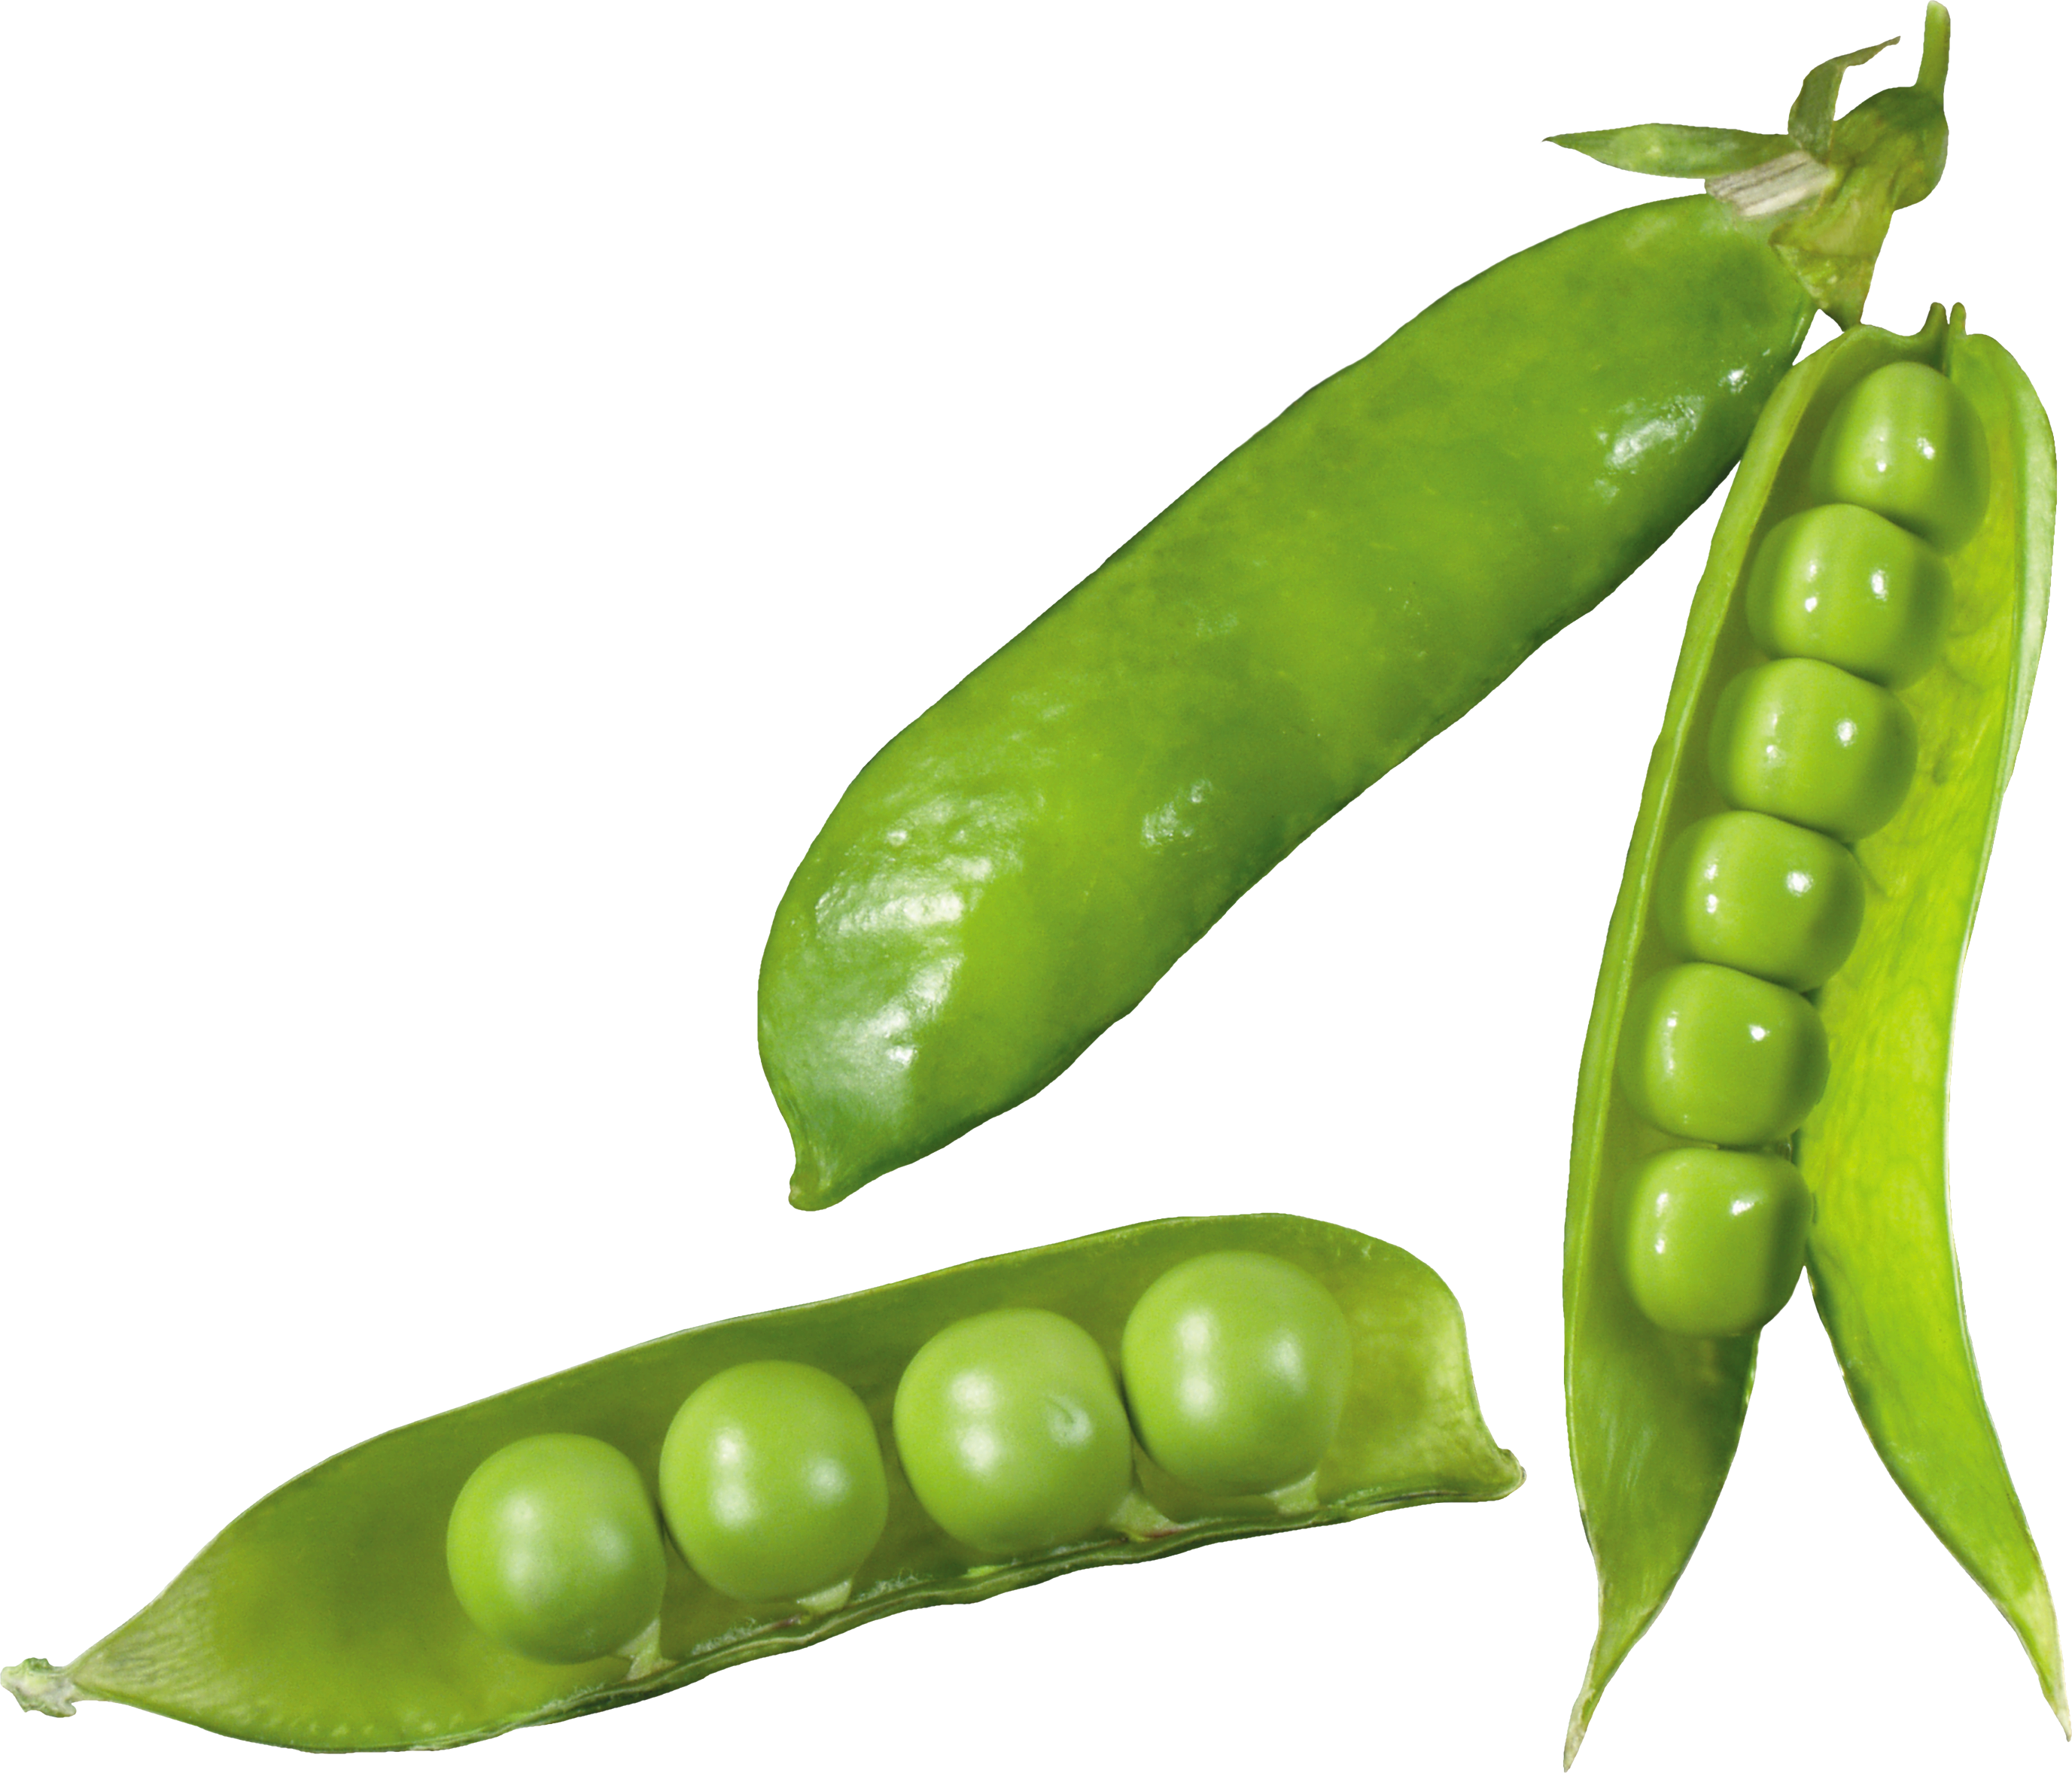 A Pea Pod With Peas In It